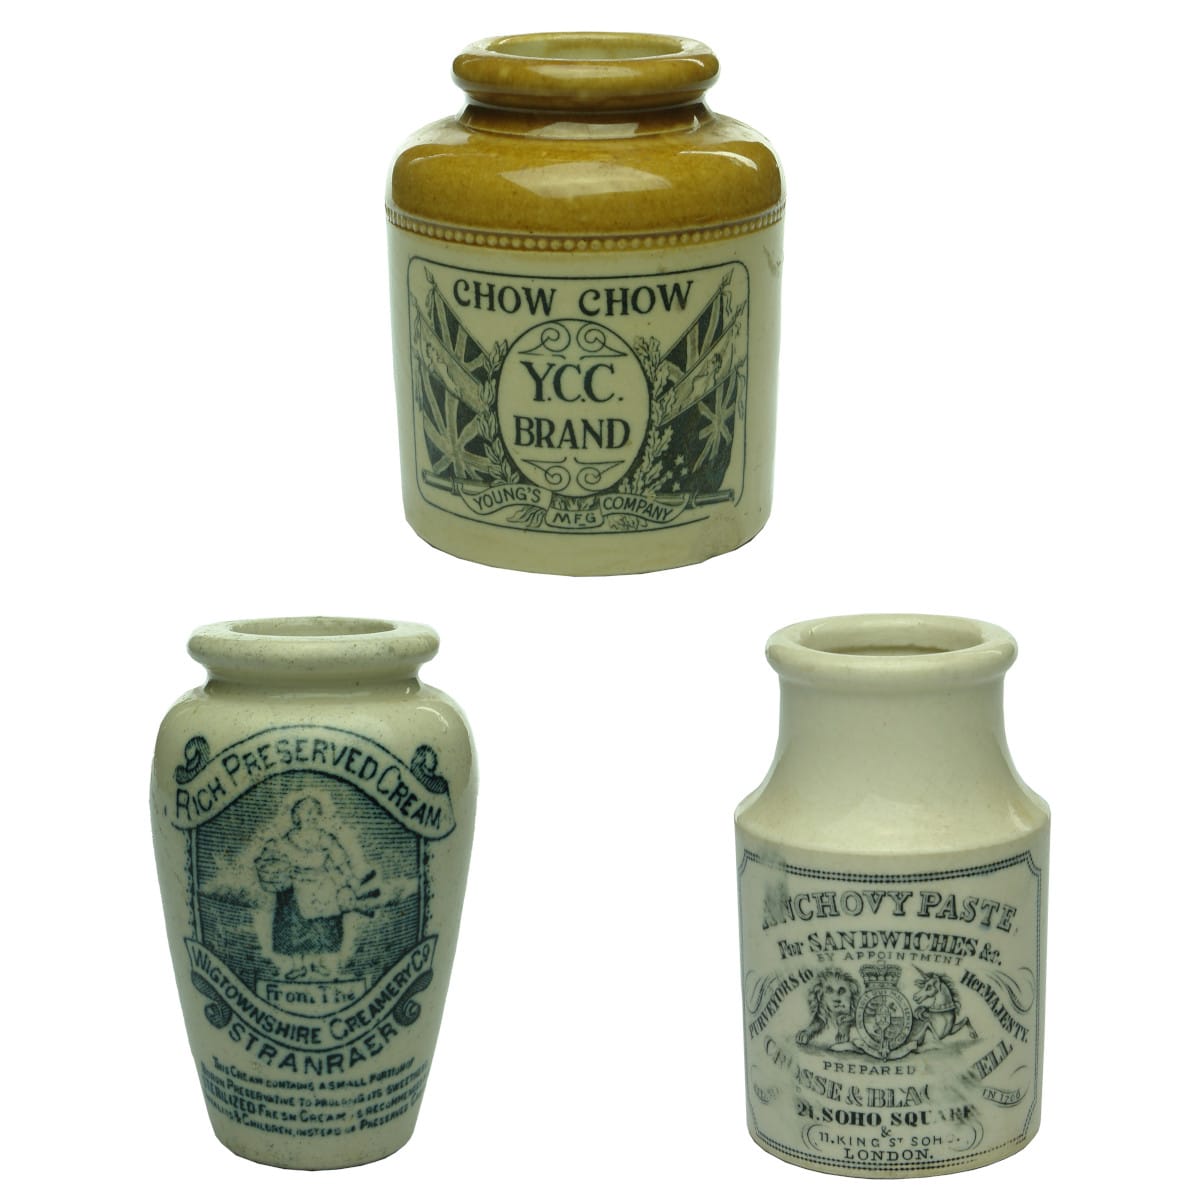 Three Stone Jars. 1. Y. C. C. Brand Chow Chow. 2. Wigtownshire Creamery Co, Stanraer. 3. Crosse & Blackwell Anchovy Paste.